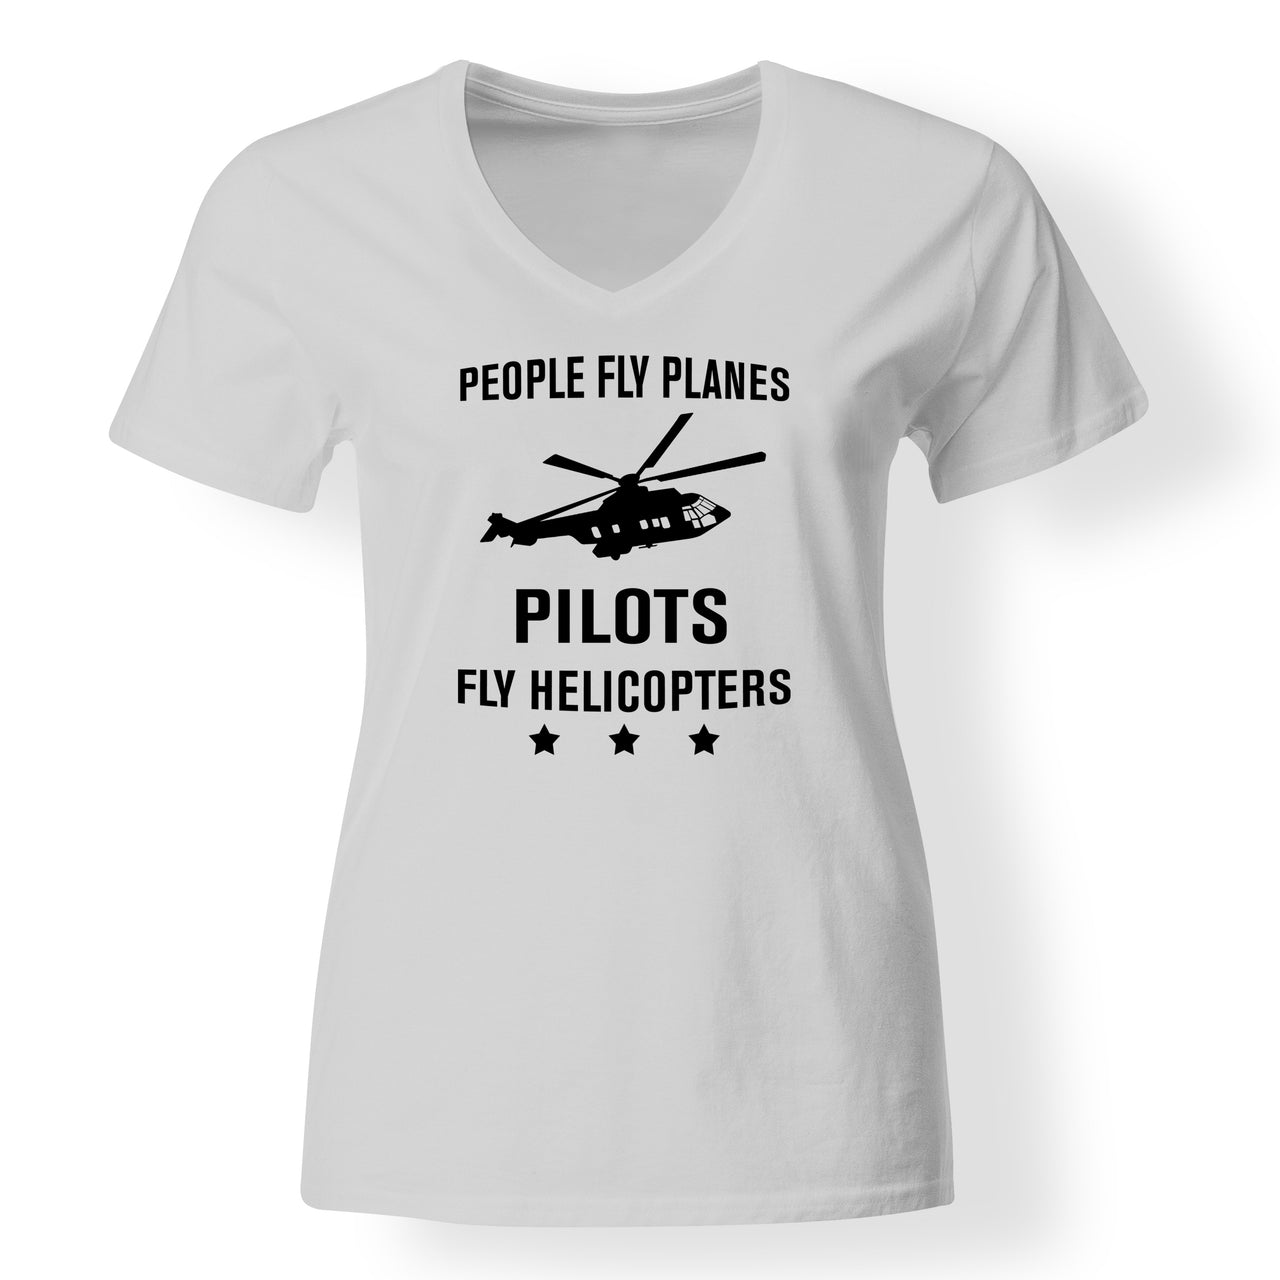 People Fly Planes Pilots Fly Helicopters Designed V-Neck T-Shirts